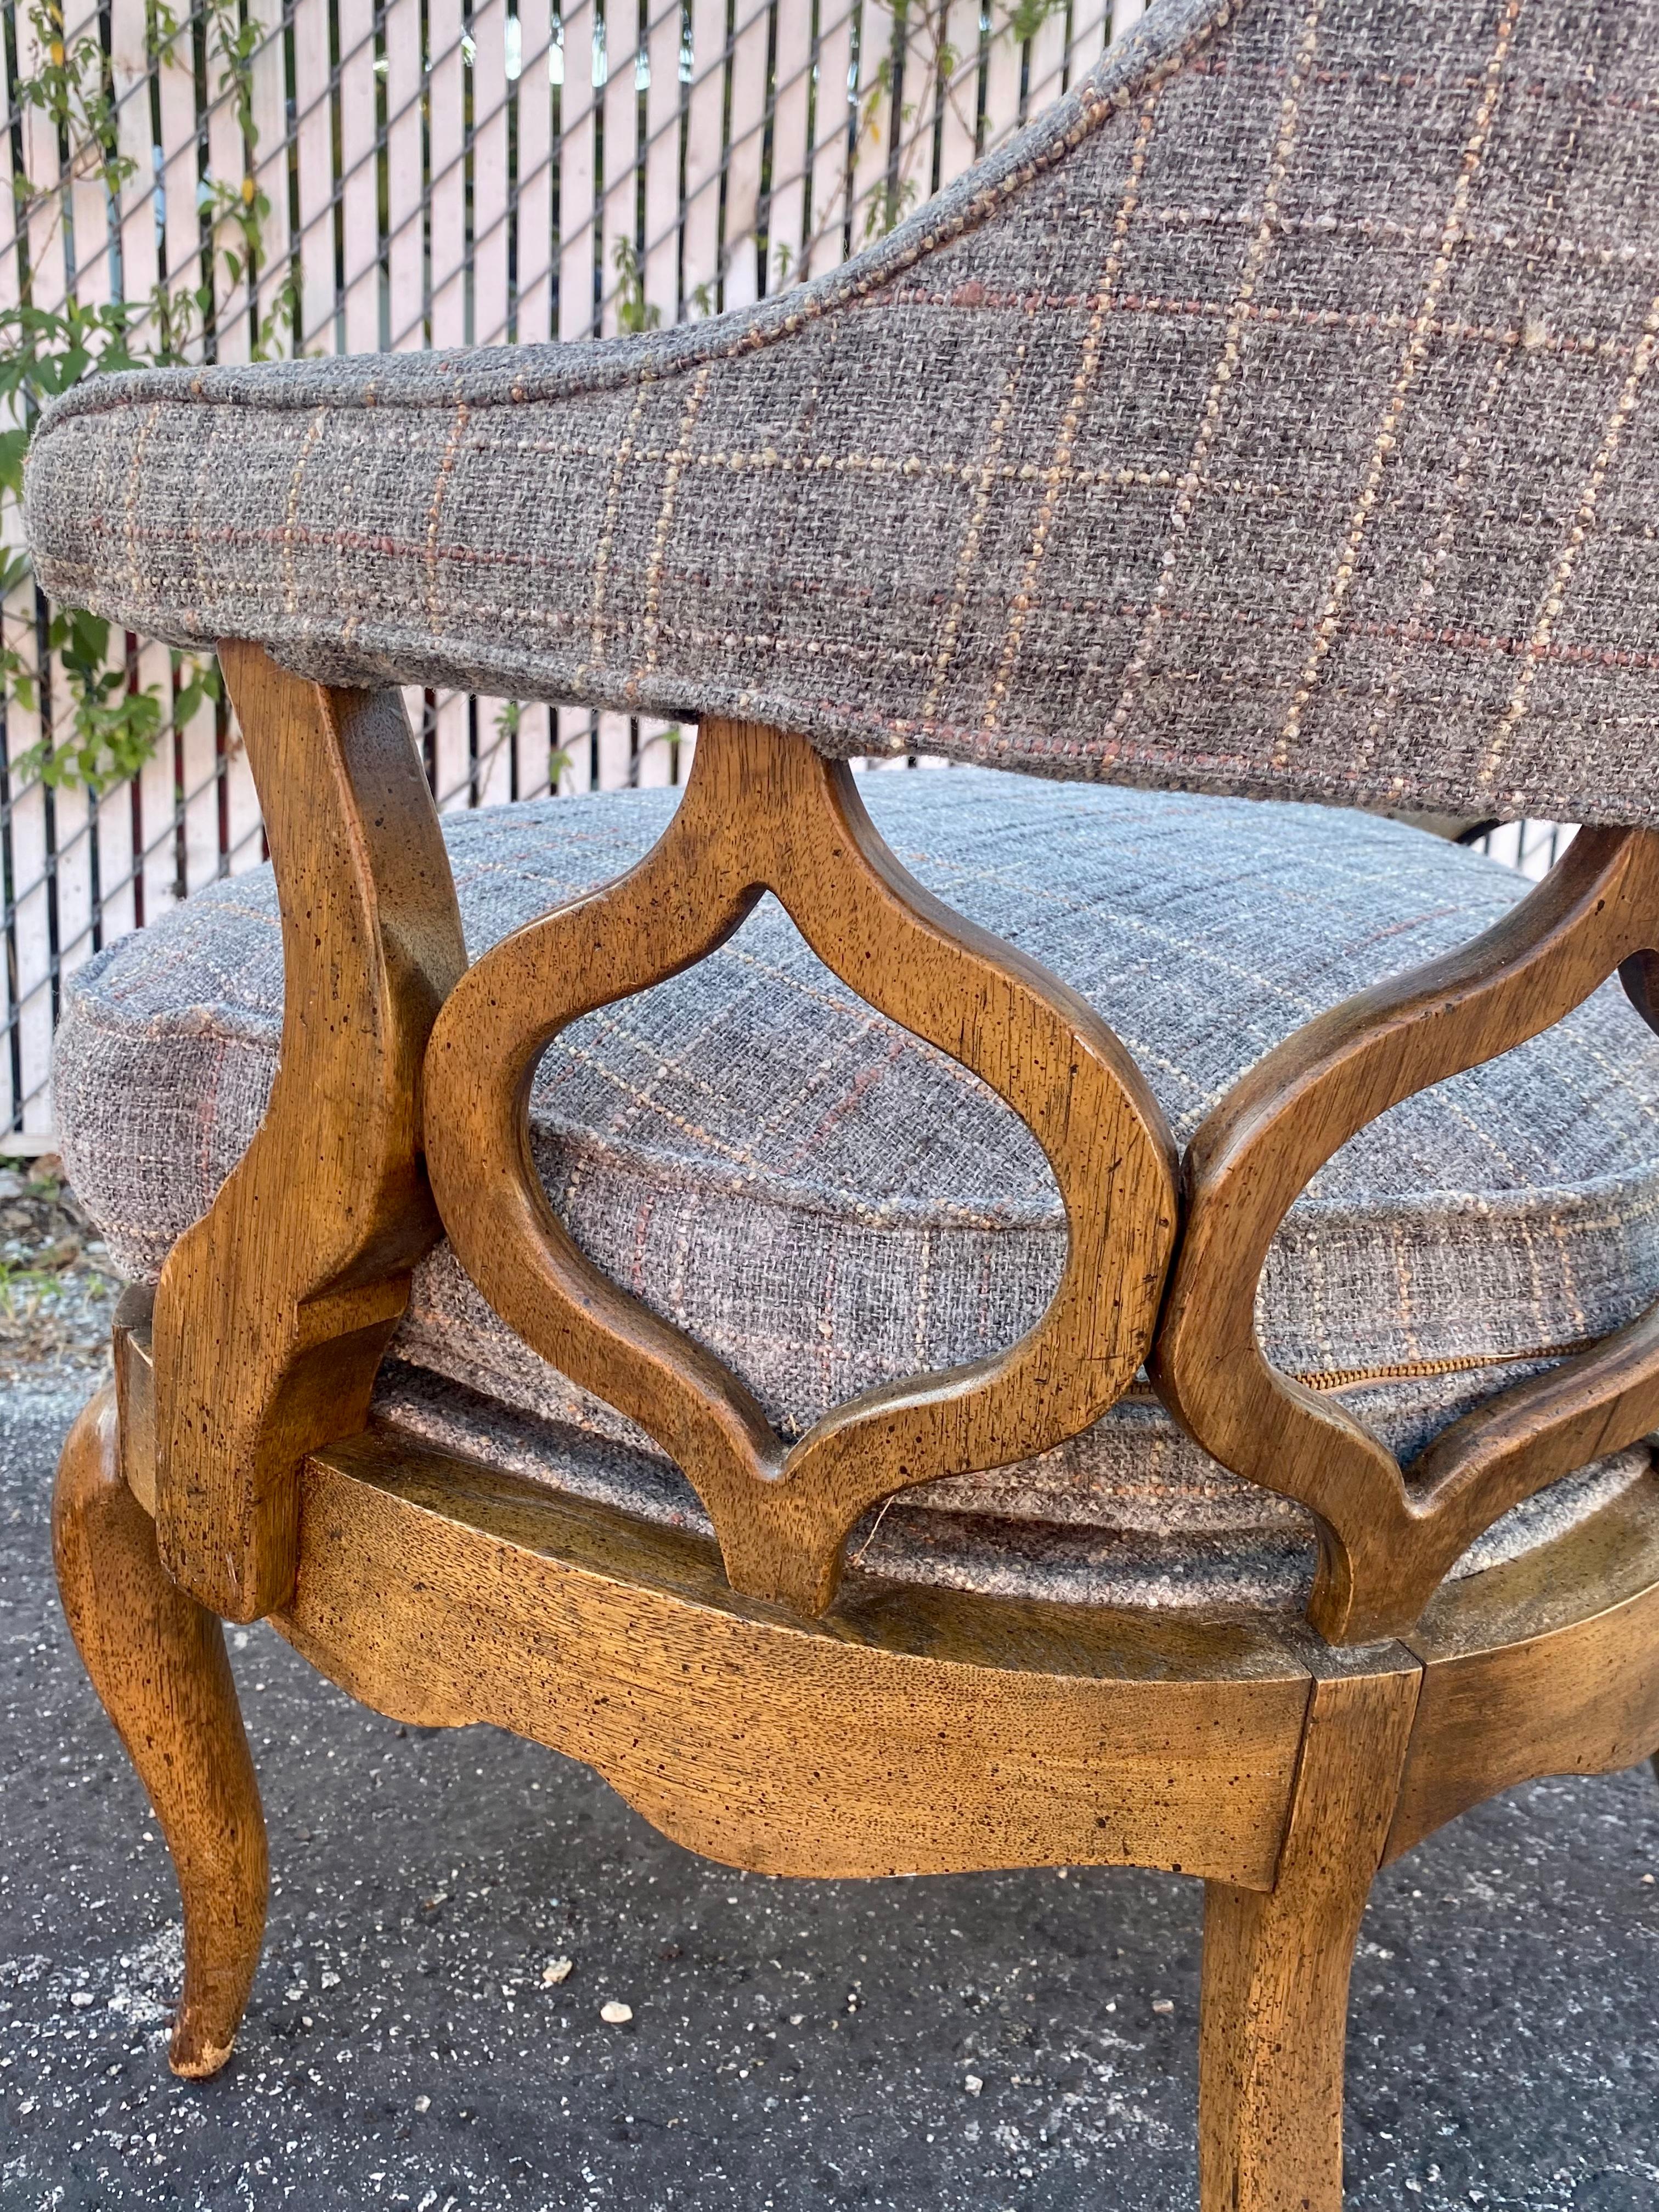 1970s  Mid Century Sculptural Curved Barrel Tweed Wood Chairs, Set of 2 For Sale 7